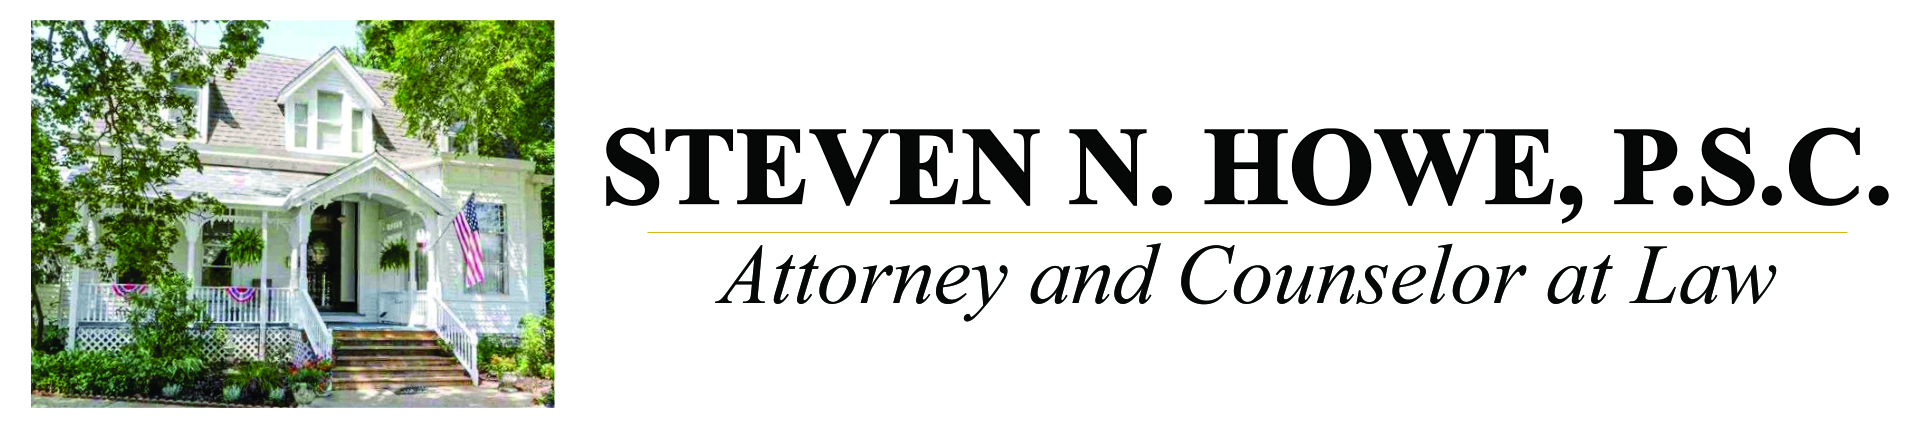 Steven N. Howe Attorney and Counselor at Law